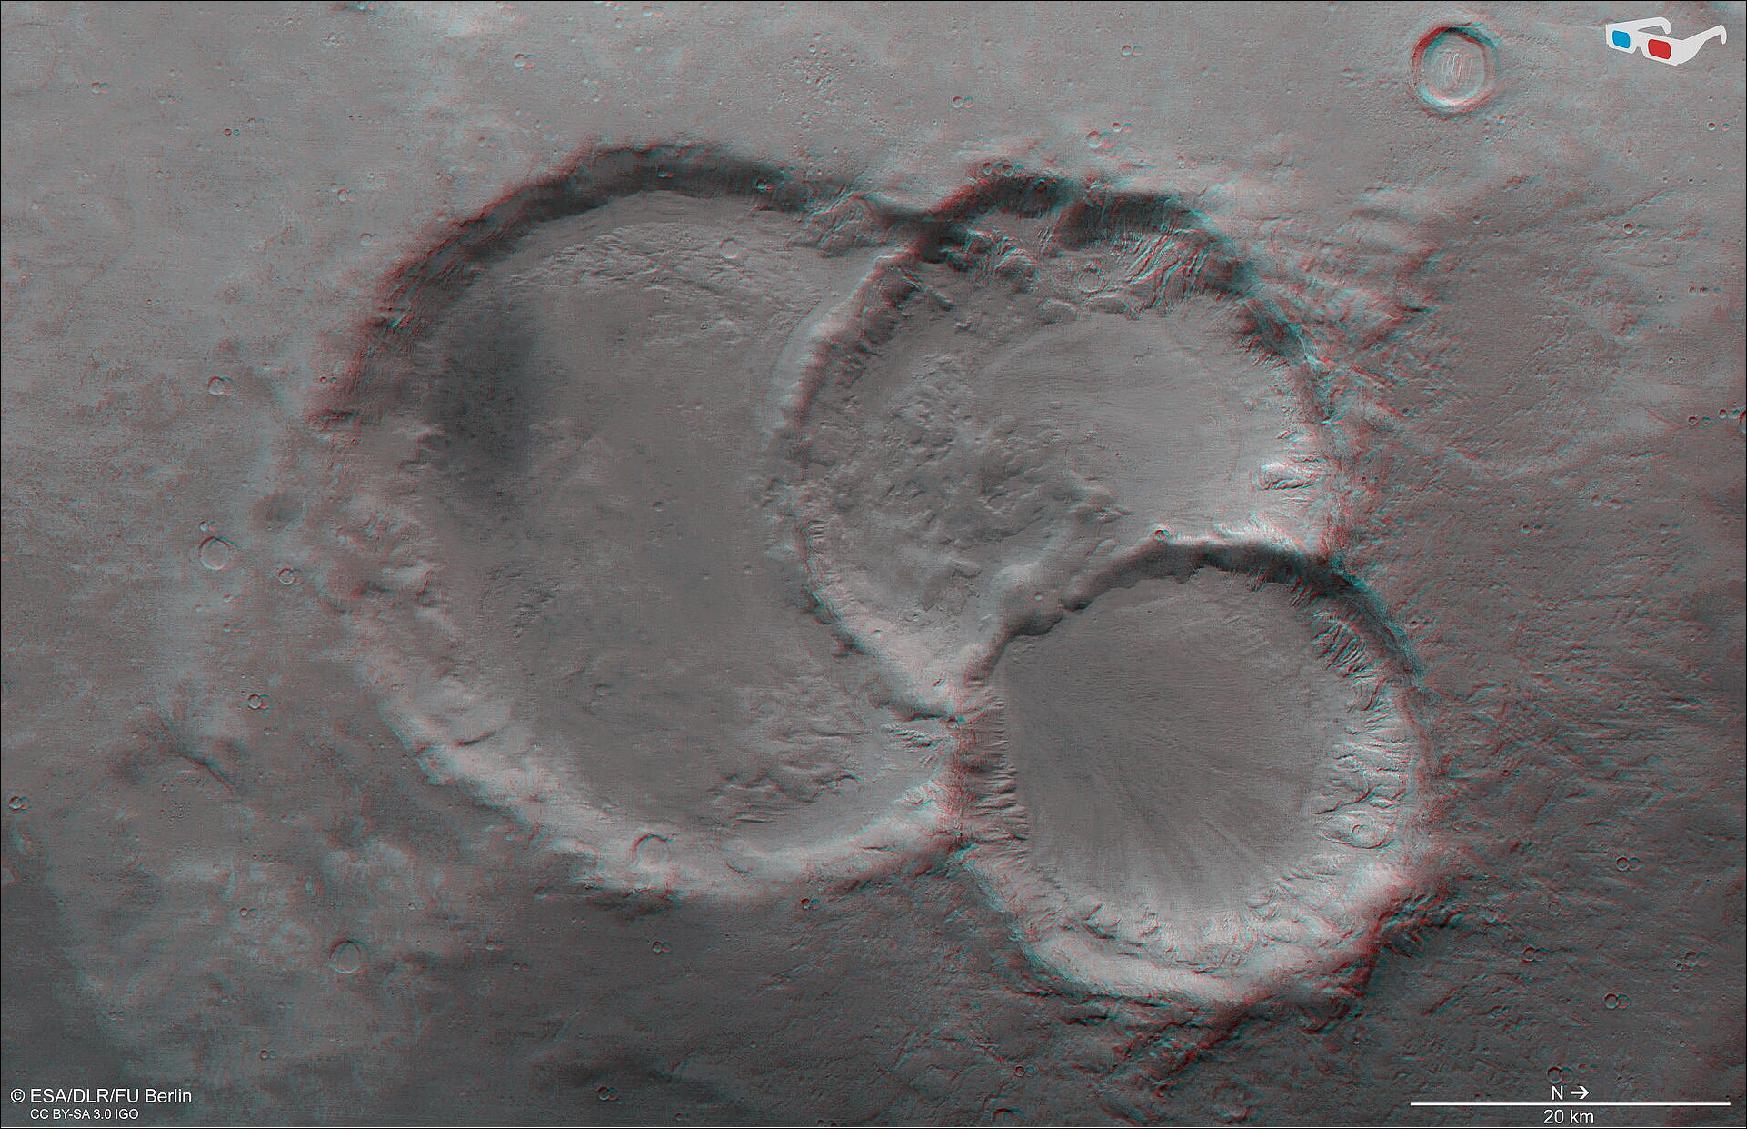 Figure 73: Triple crater east of Le Verrier in 3D. This image shows a triple crater in the ancient martian highlands in 3D when viewed using red-green or red-blue glasses. This anaglyph was derived from data obtained by the nadir and stereo channels of the High Resolution Stereo Camera (HRSC) on ESA’s Mars Express during spacecraft orbit 20982 (6 August 2020). It covers a part of the martian surface centered at 19ºE/37ºS. North is to the right (image credit: ESA/DLR/FU Berlin, CC BY-SA 3.0 IGO)